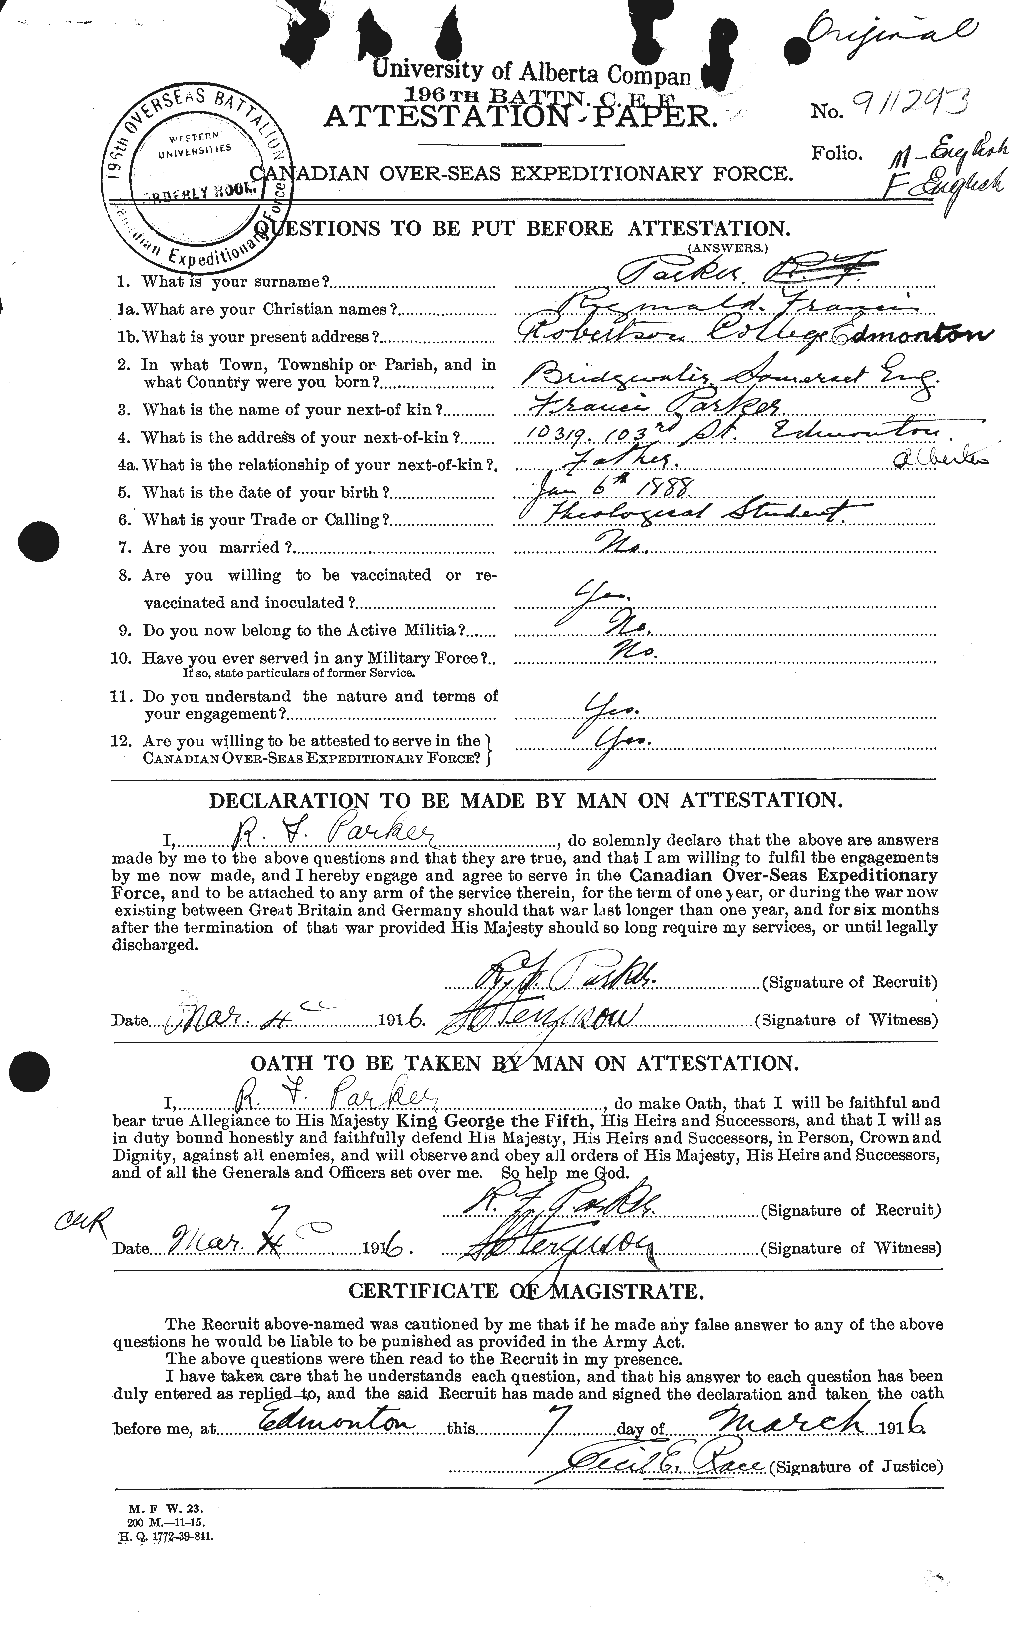 Personnel Records of the First World War - CEF 565577a